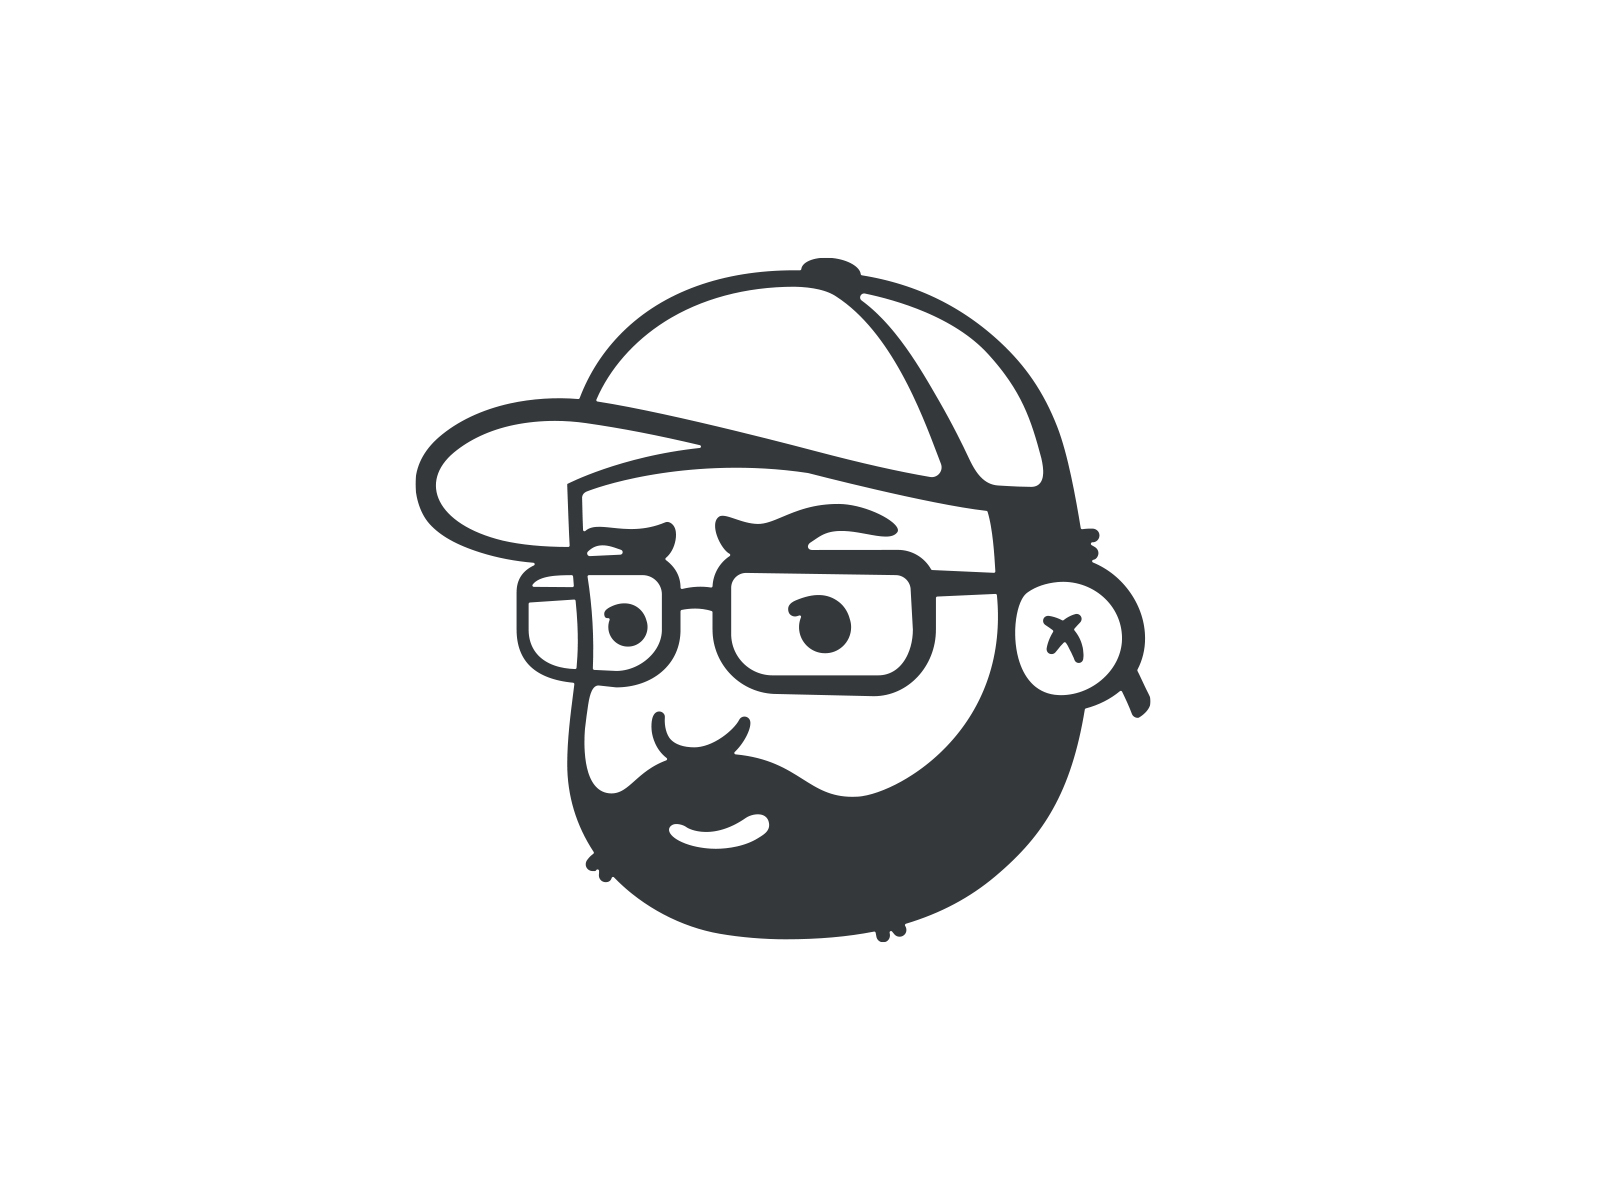 Simple Avatar of Myself by Tyler Coderre on Dribbble